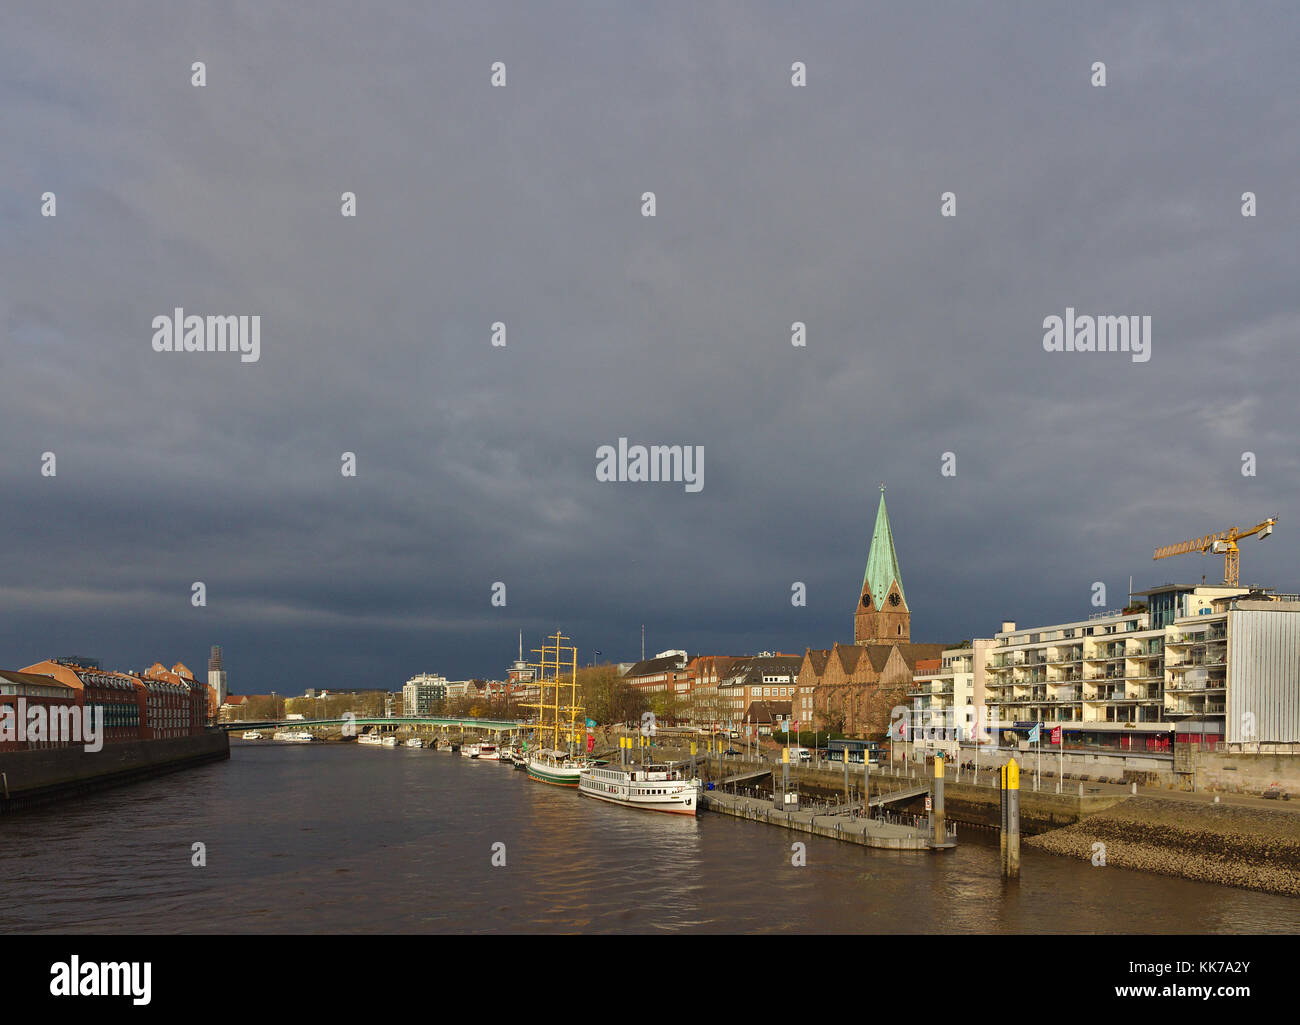 Riverside view of Bremen, Germany with moored ships, historic church, residential buildings and dark rain clouds in the background Stock Photo